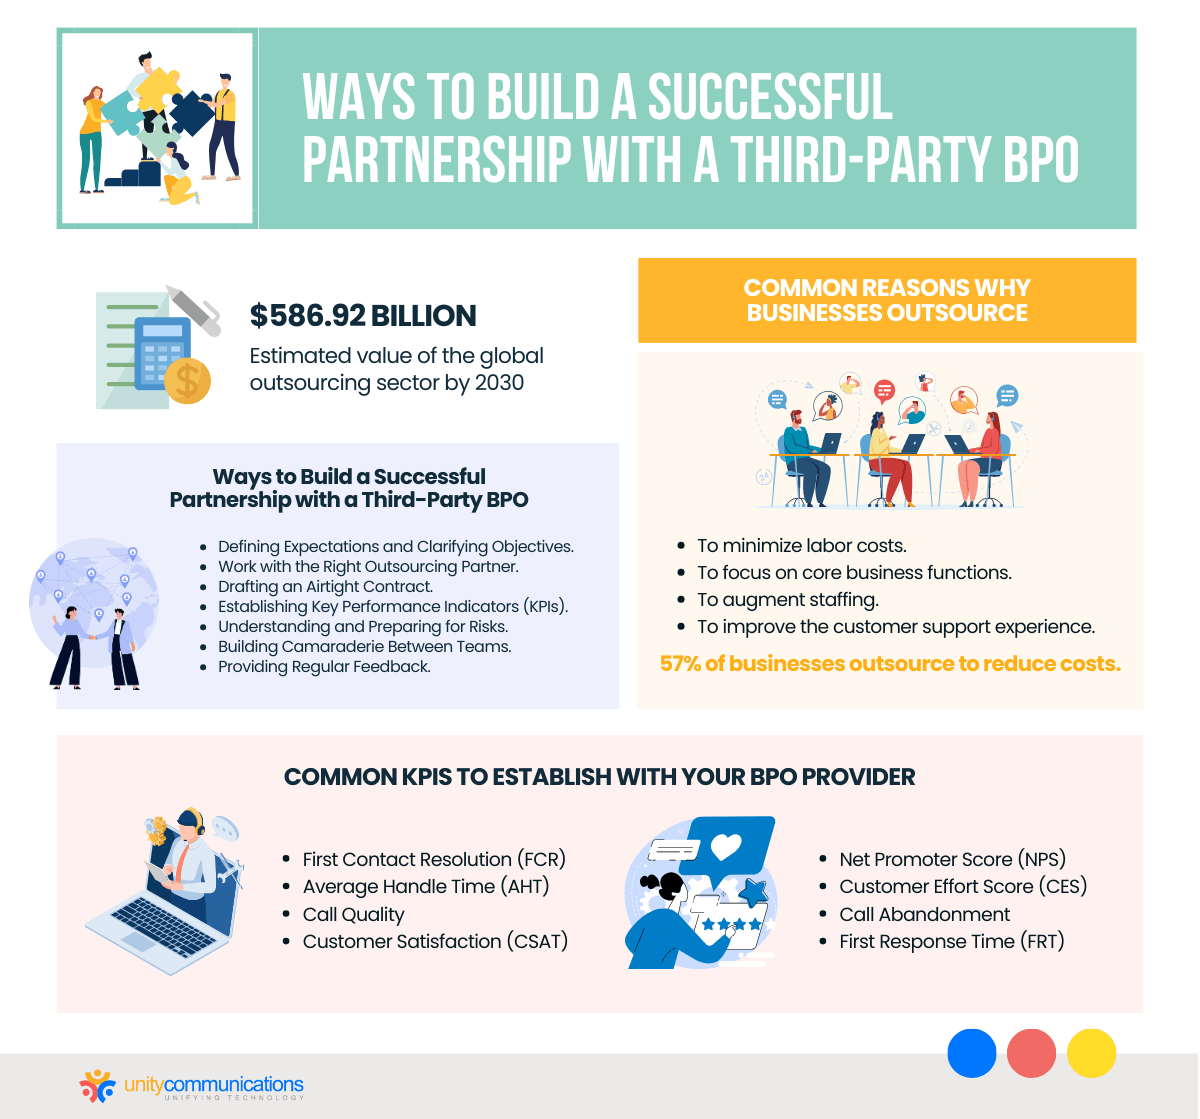 Ways to Build a Successful Partnership with a Third-Party BPO